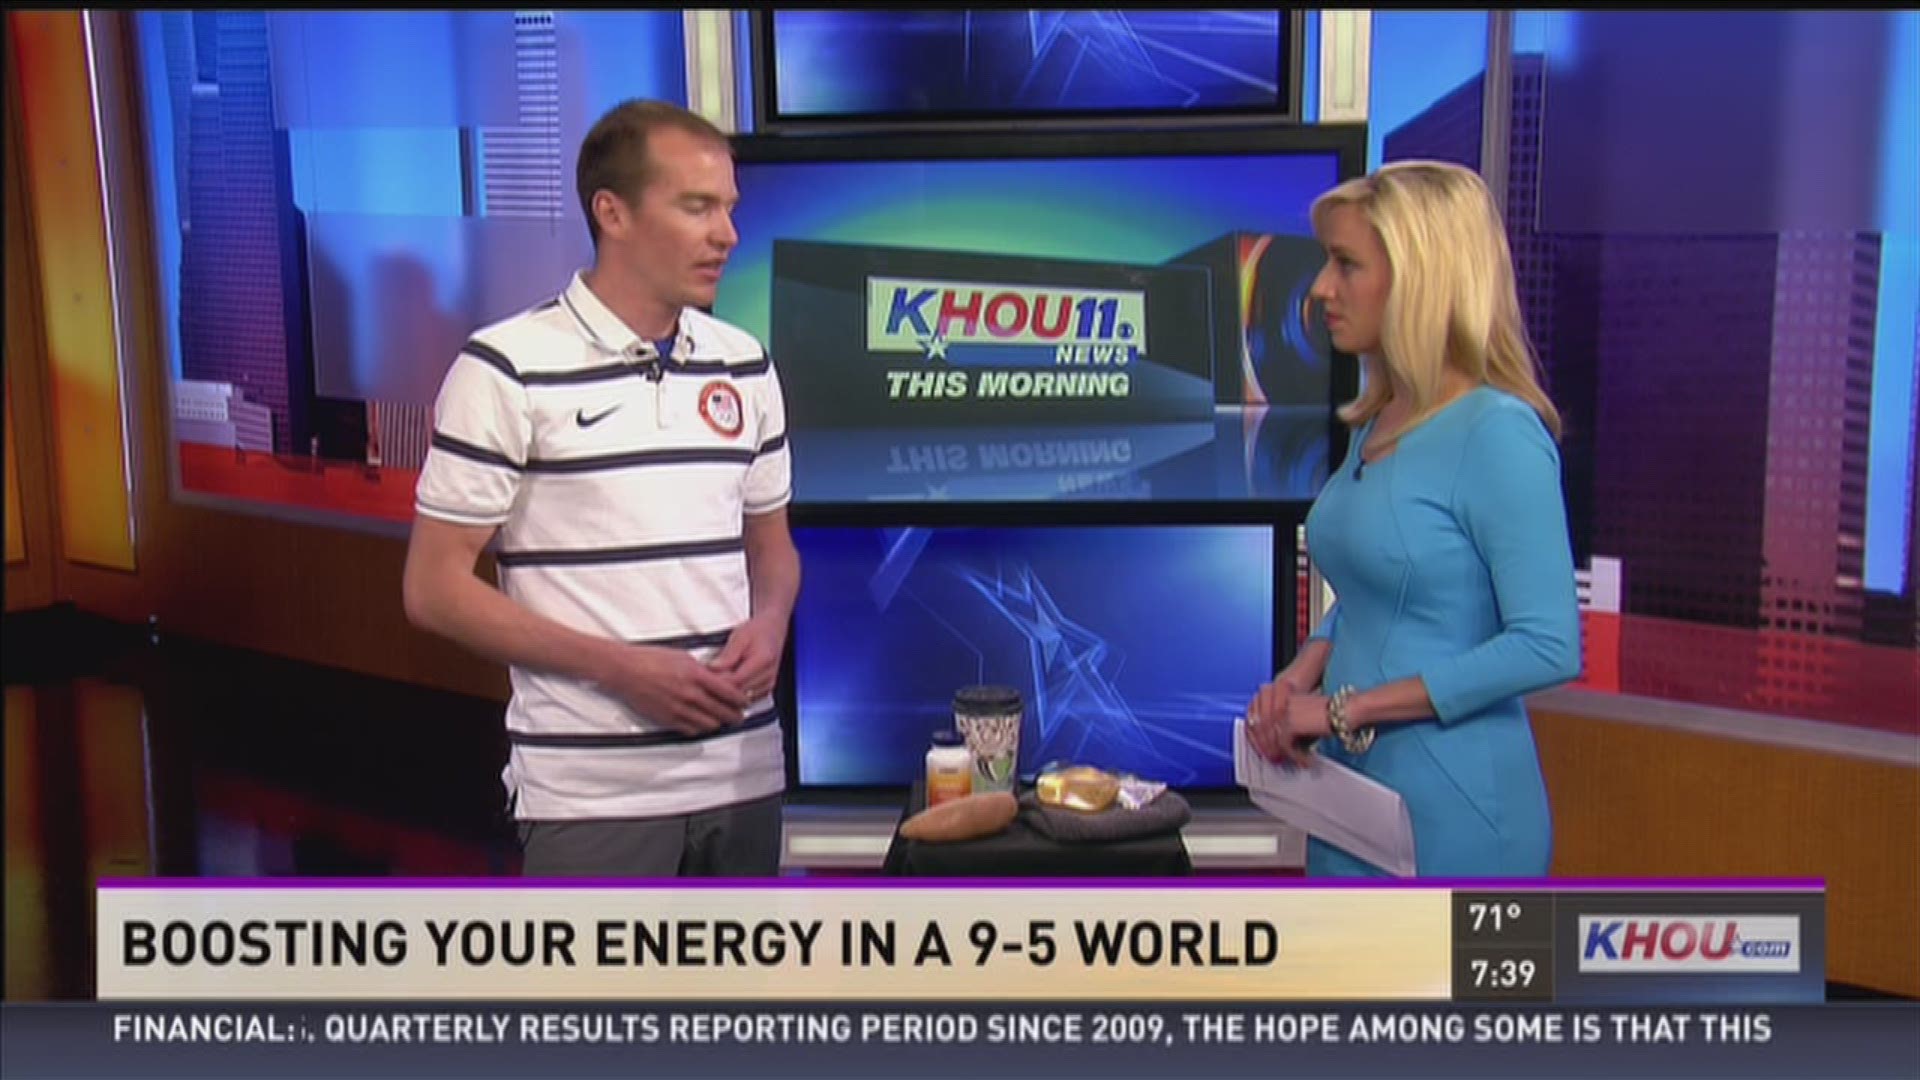 Gold medal Olympian Billy Demong gives viewers tips on boosting their energy while sitting at their desks all day.